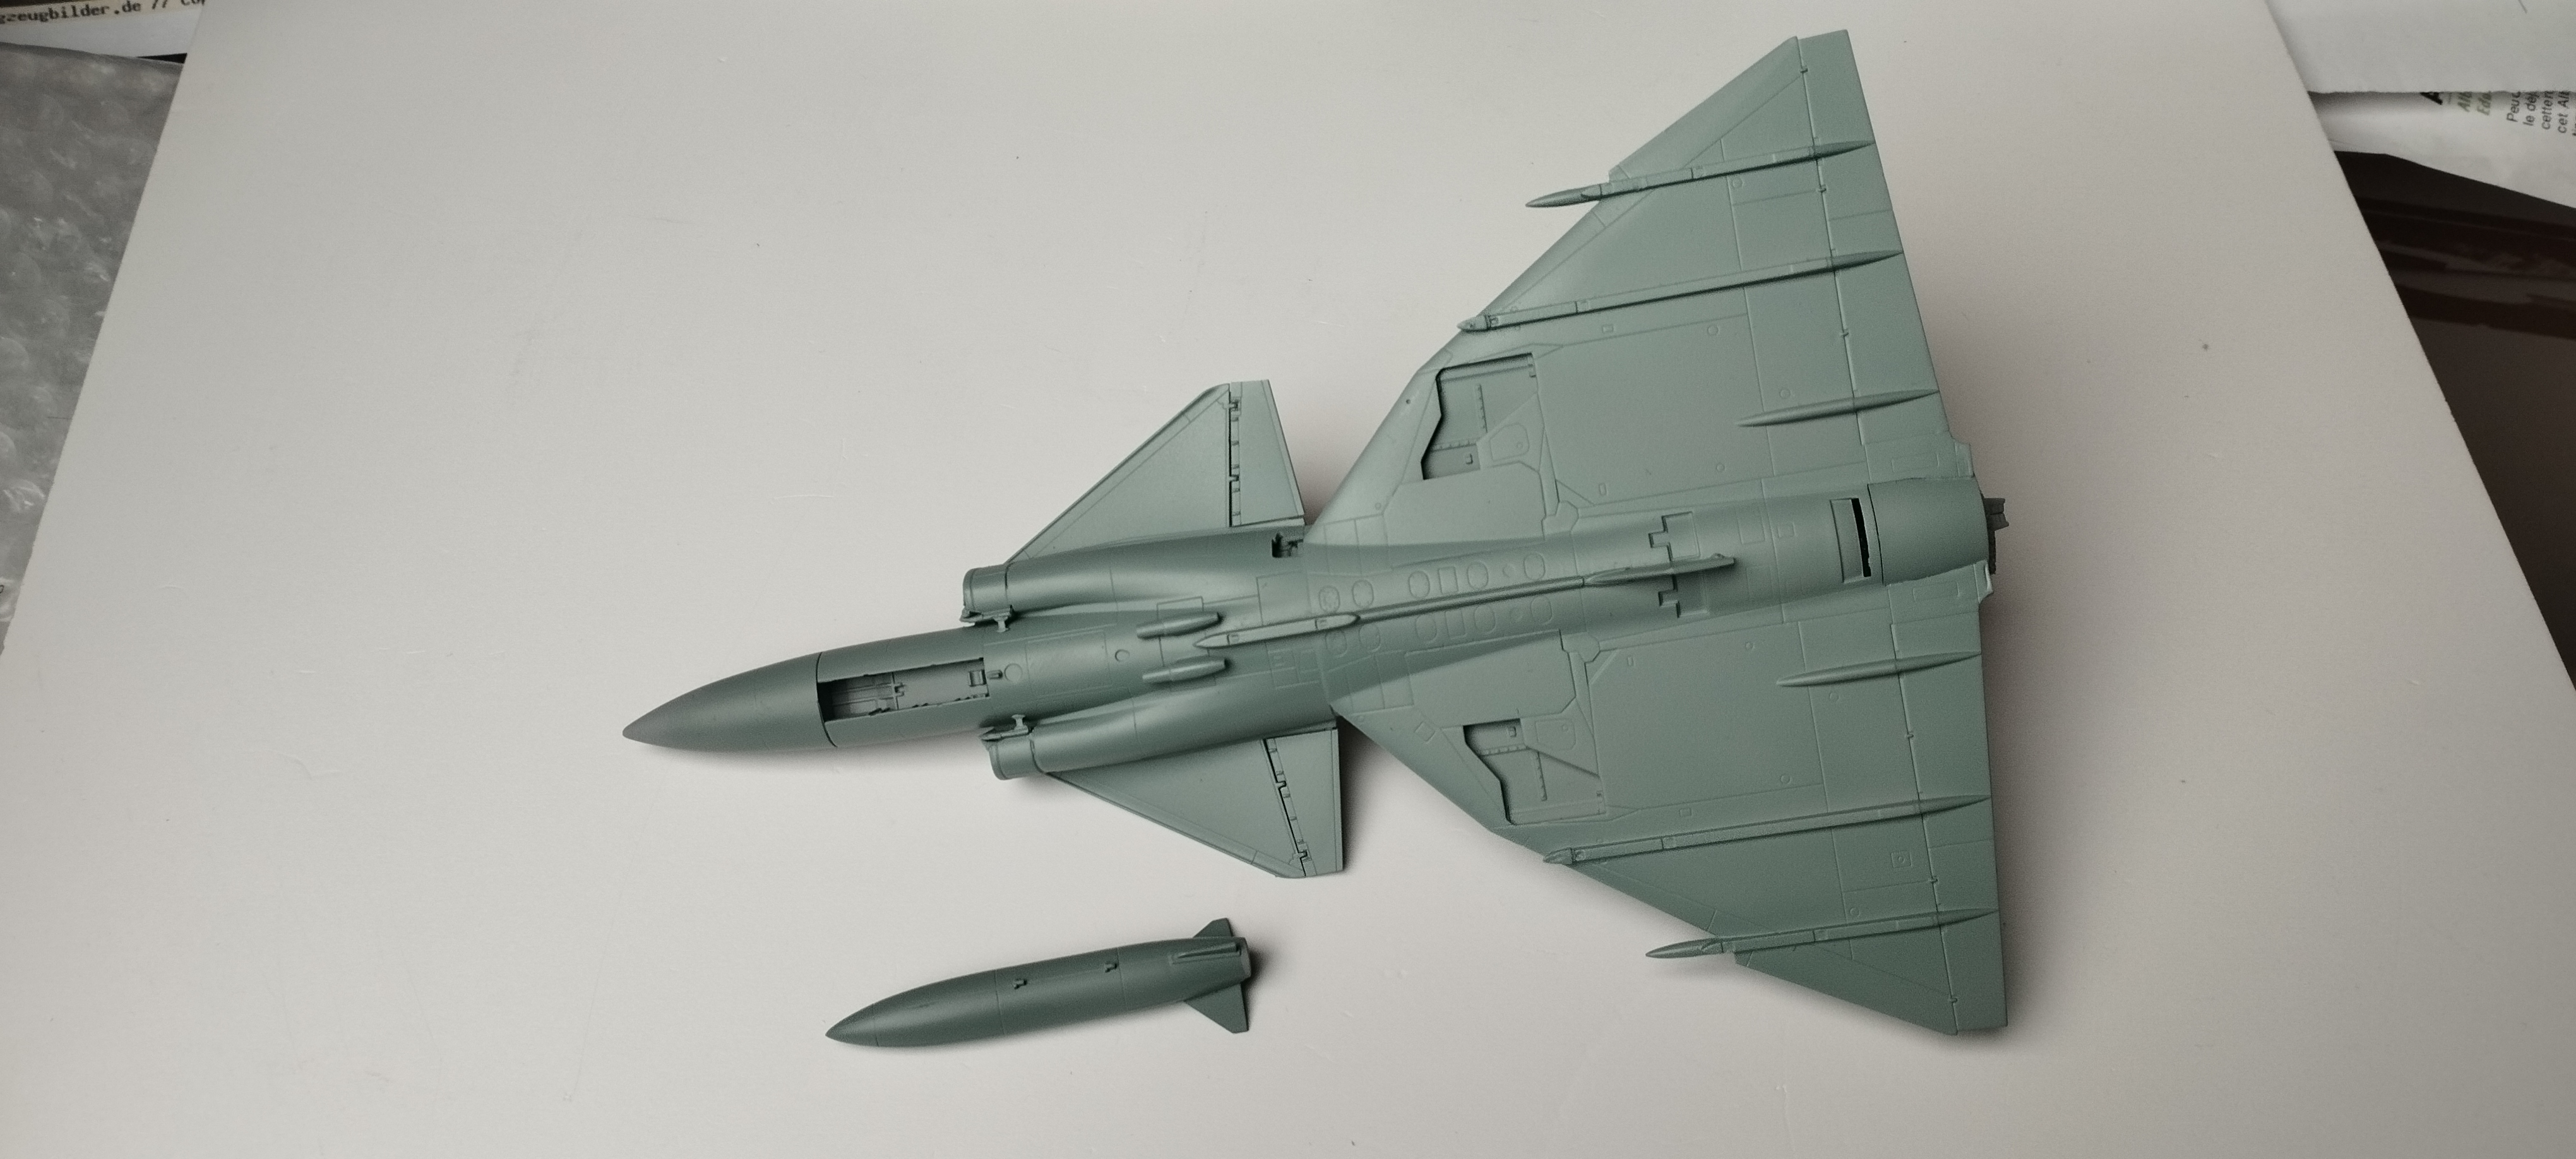 [ Special Hobby ] Saab SK-37 Viggen biplace Oiw2